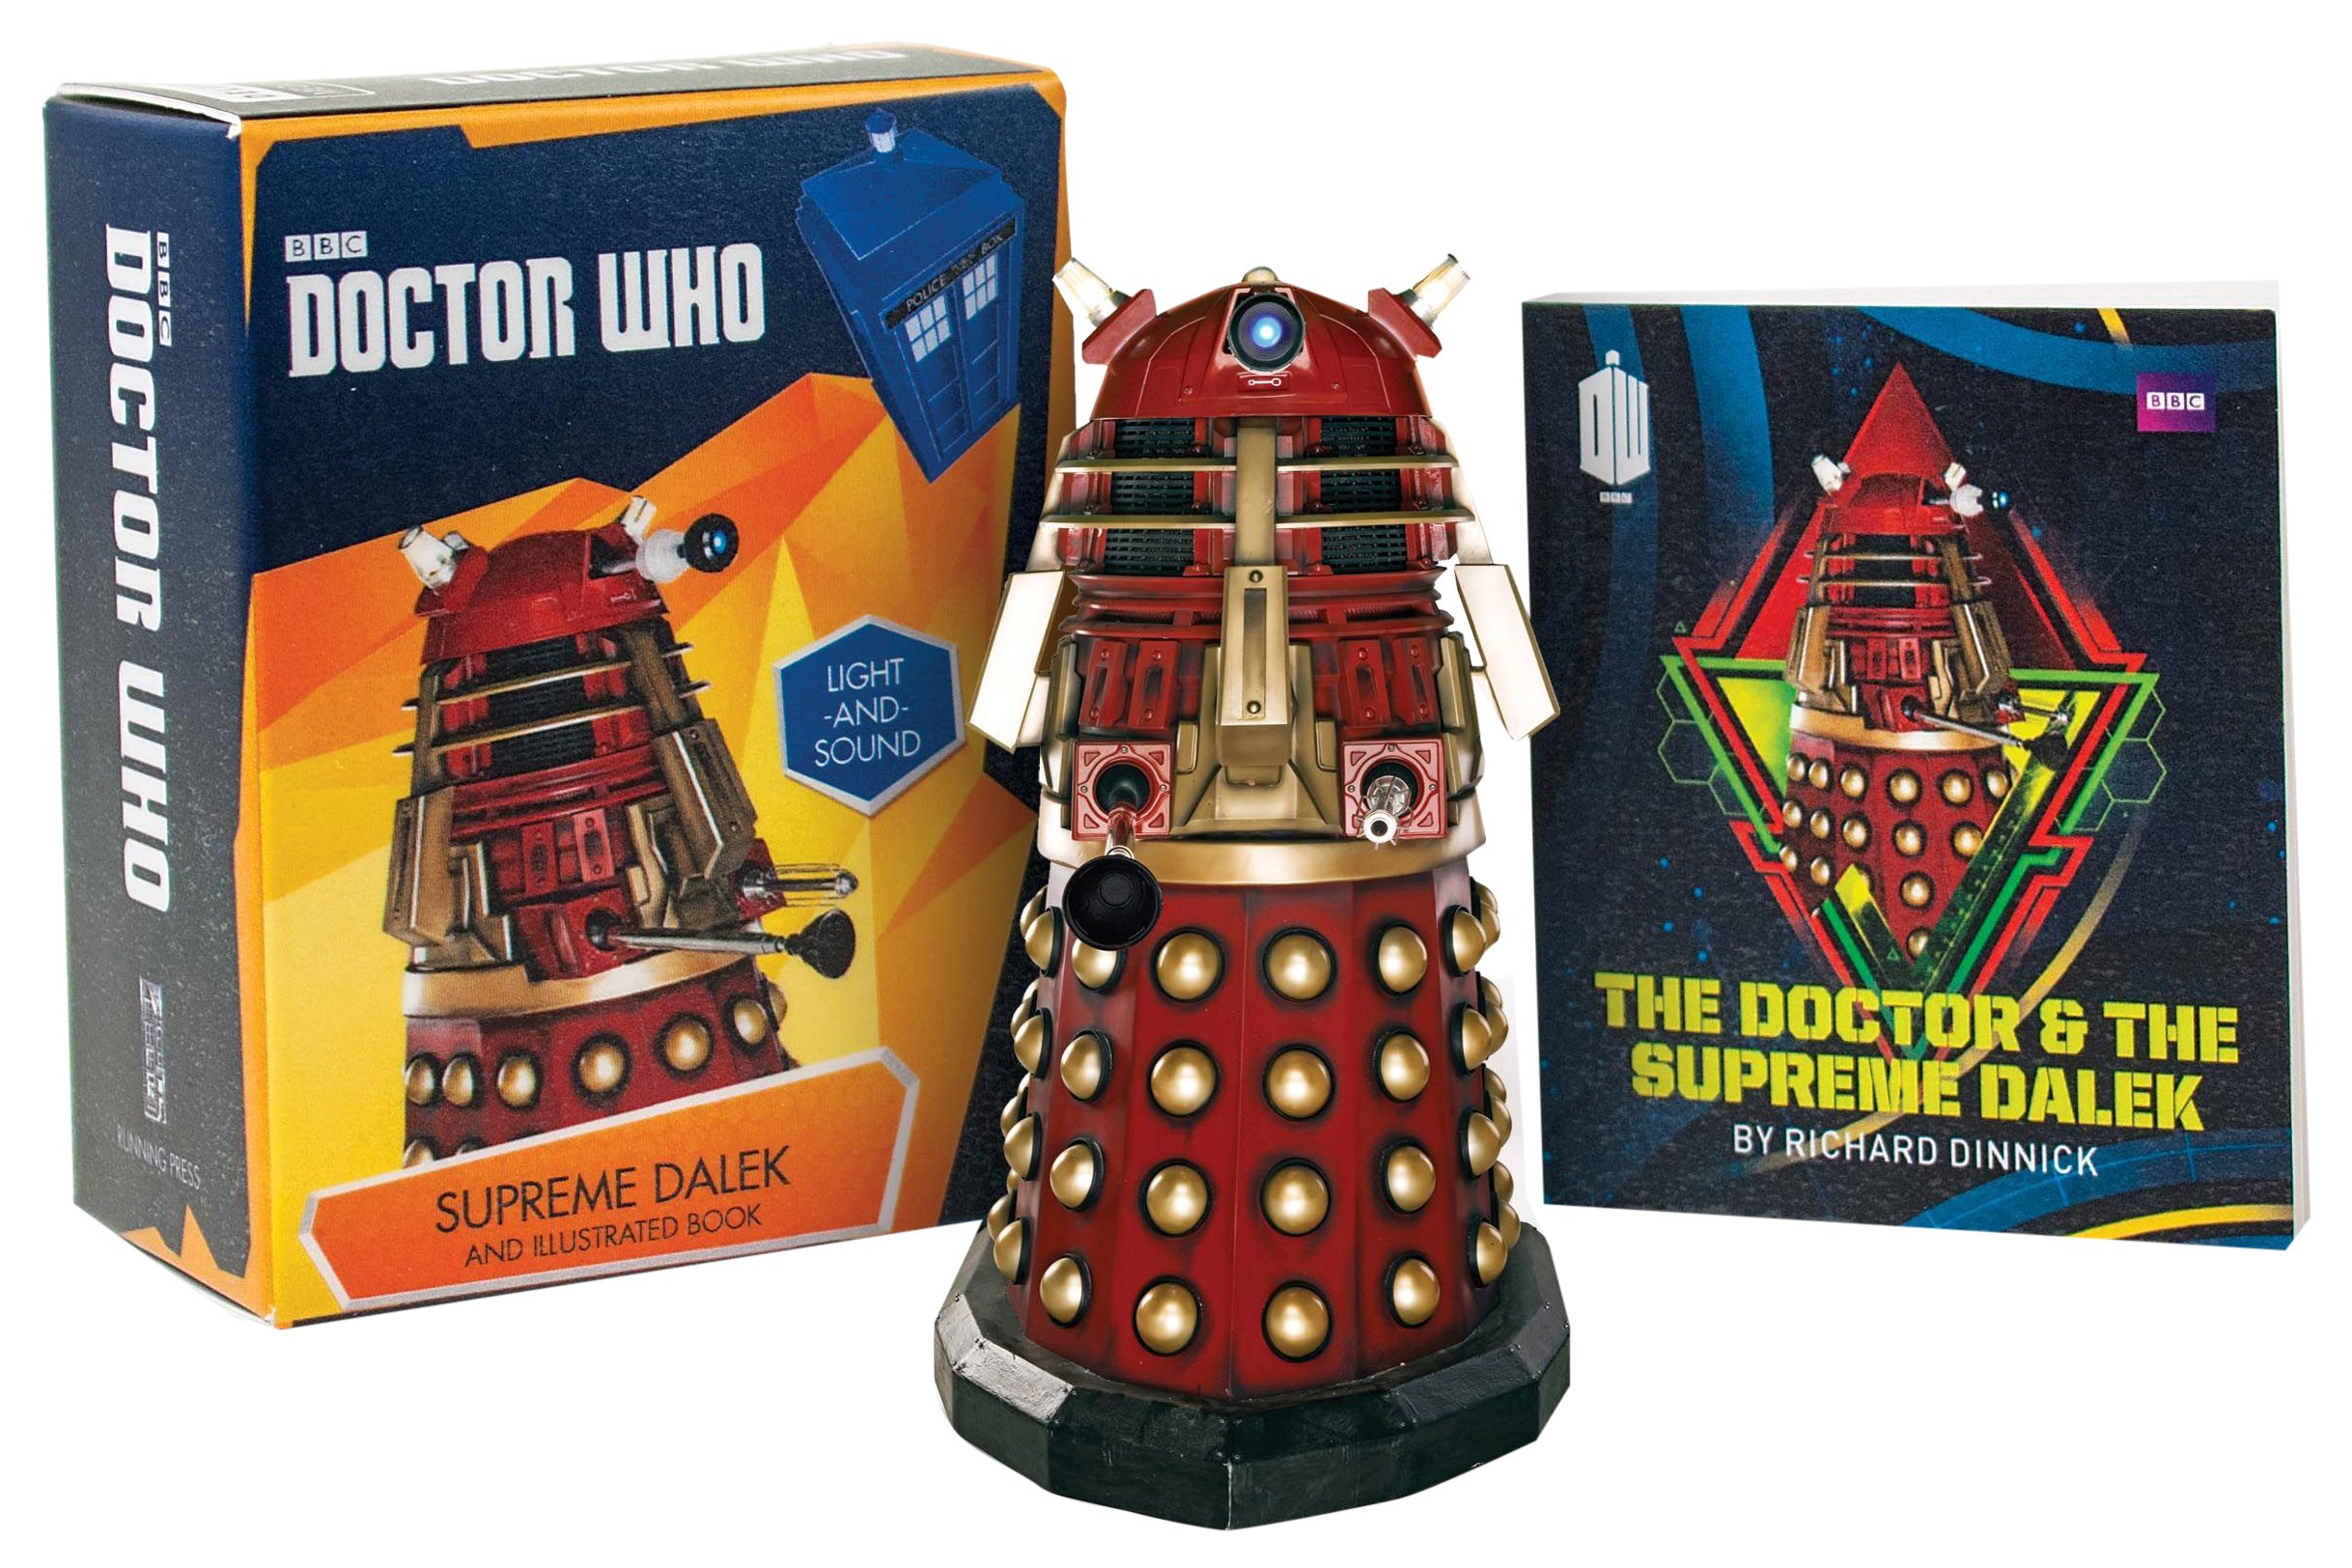 Doctor Who - Supreme Dalek and Illustrated Book